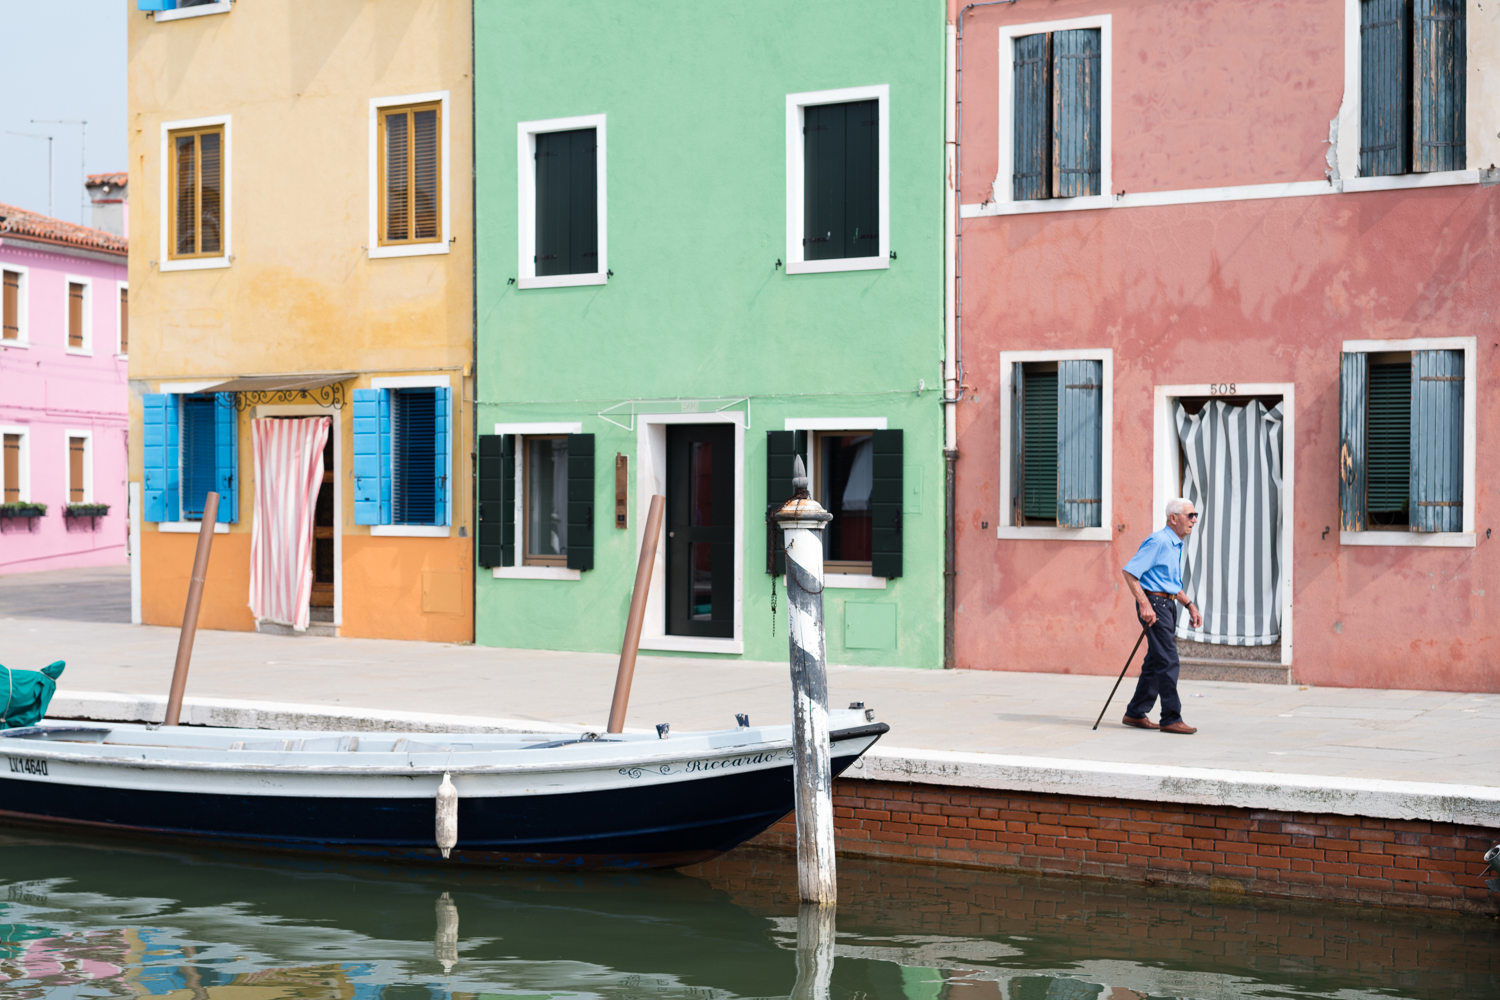   Burano color palette + wandering man     Leica M10 1/1000s F2 ISO100  